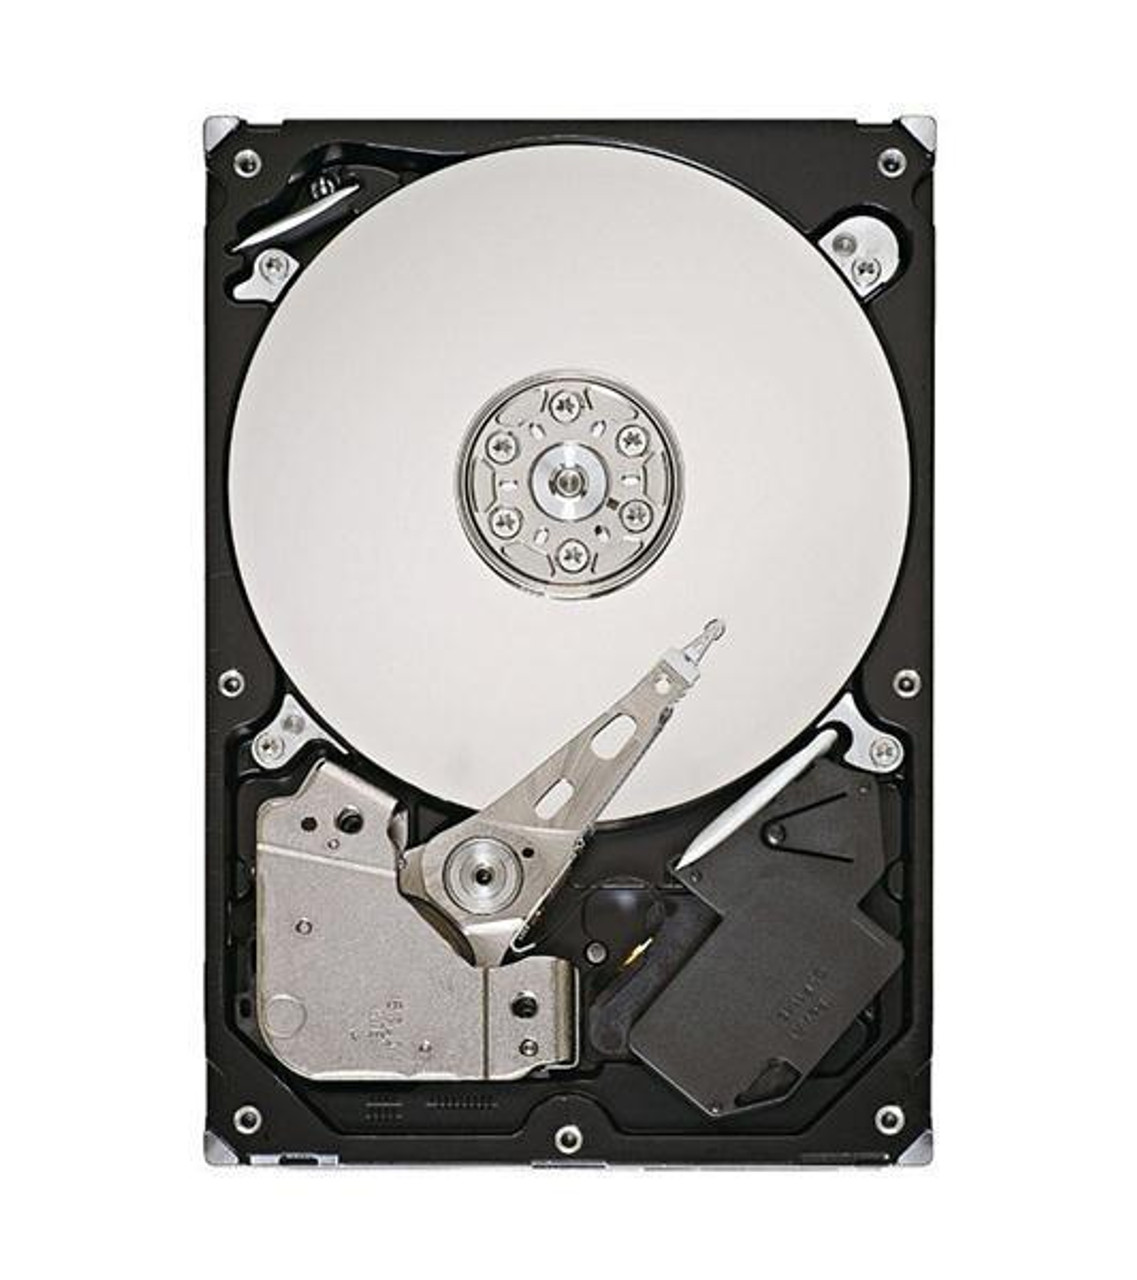 4N40A33714-01 Lenovo 2TB 7200RPM SATA 6Gbps 64MB Cache 3.5-inch Internal Hard Drive for NAS (4-Pack)